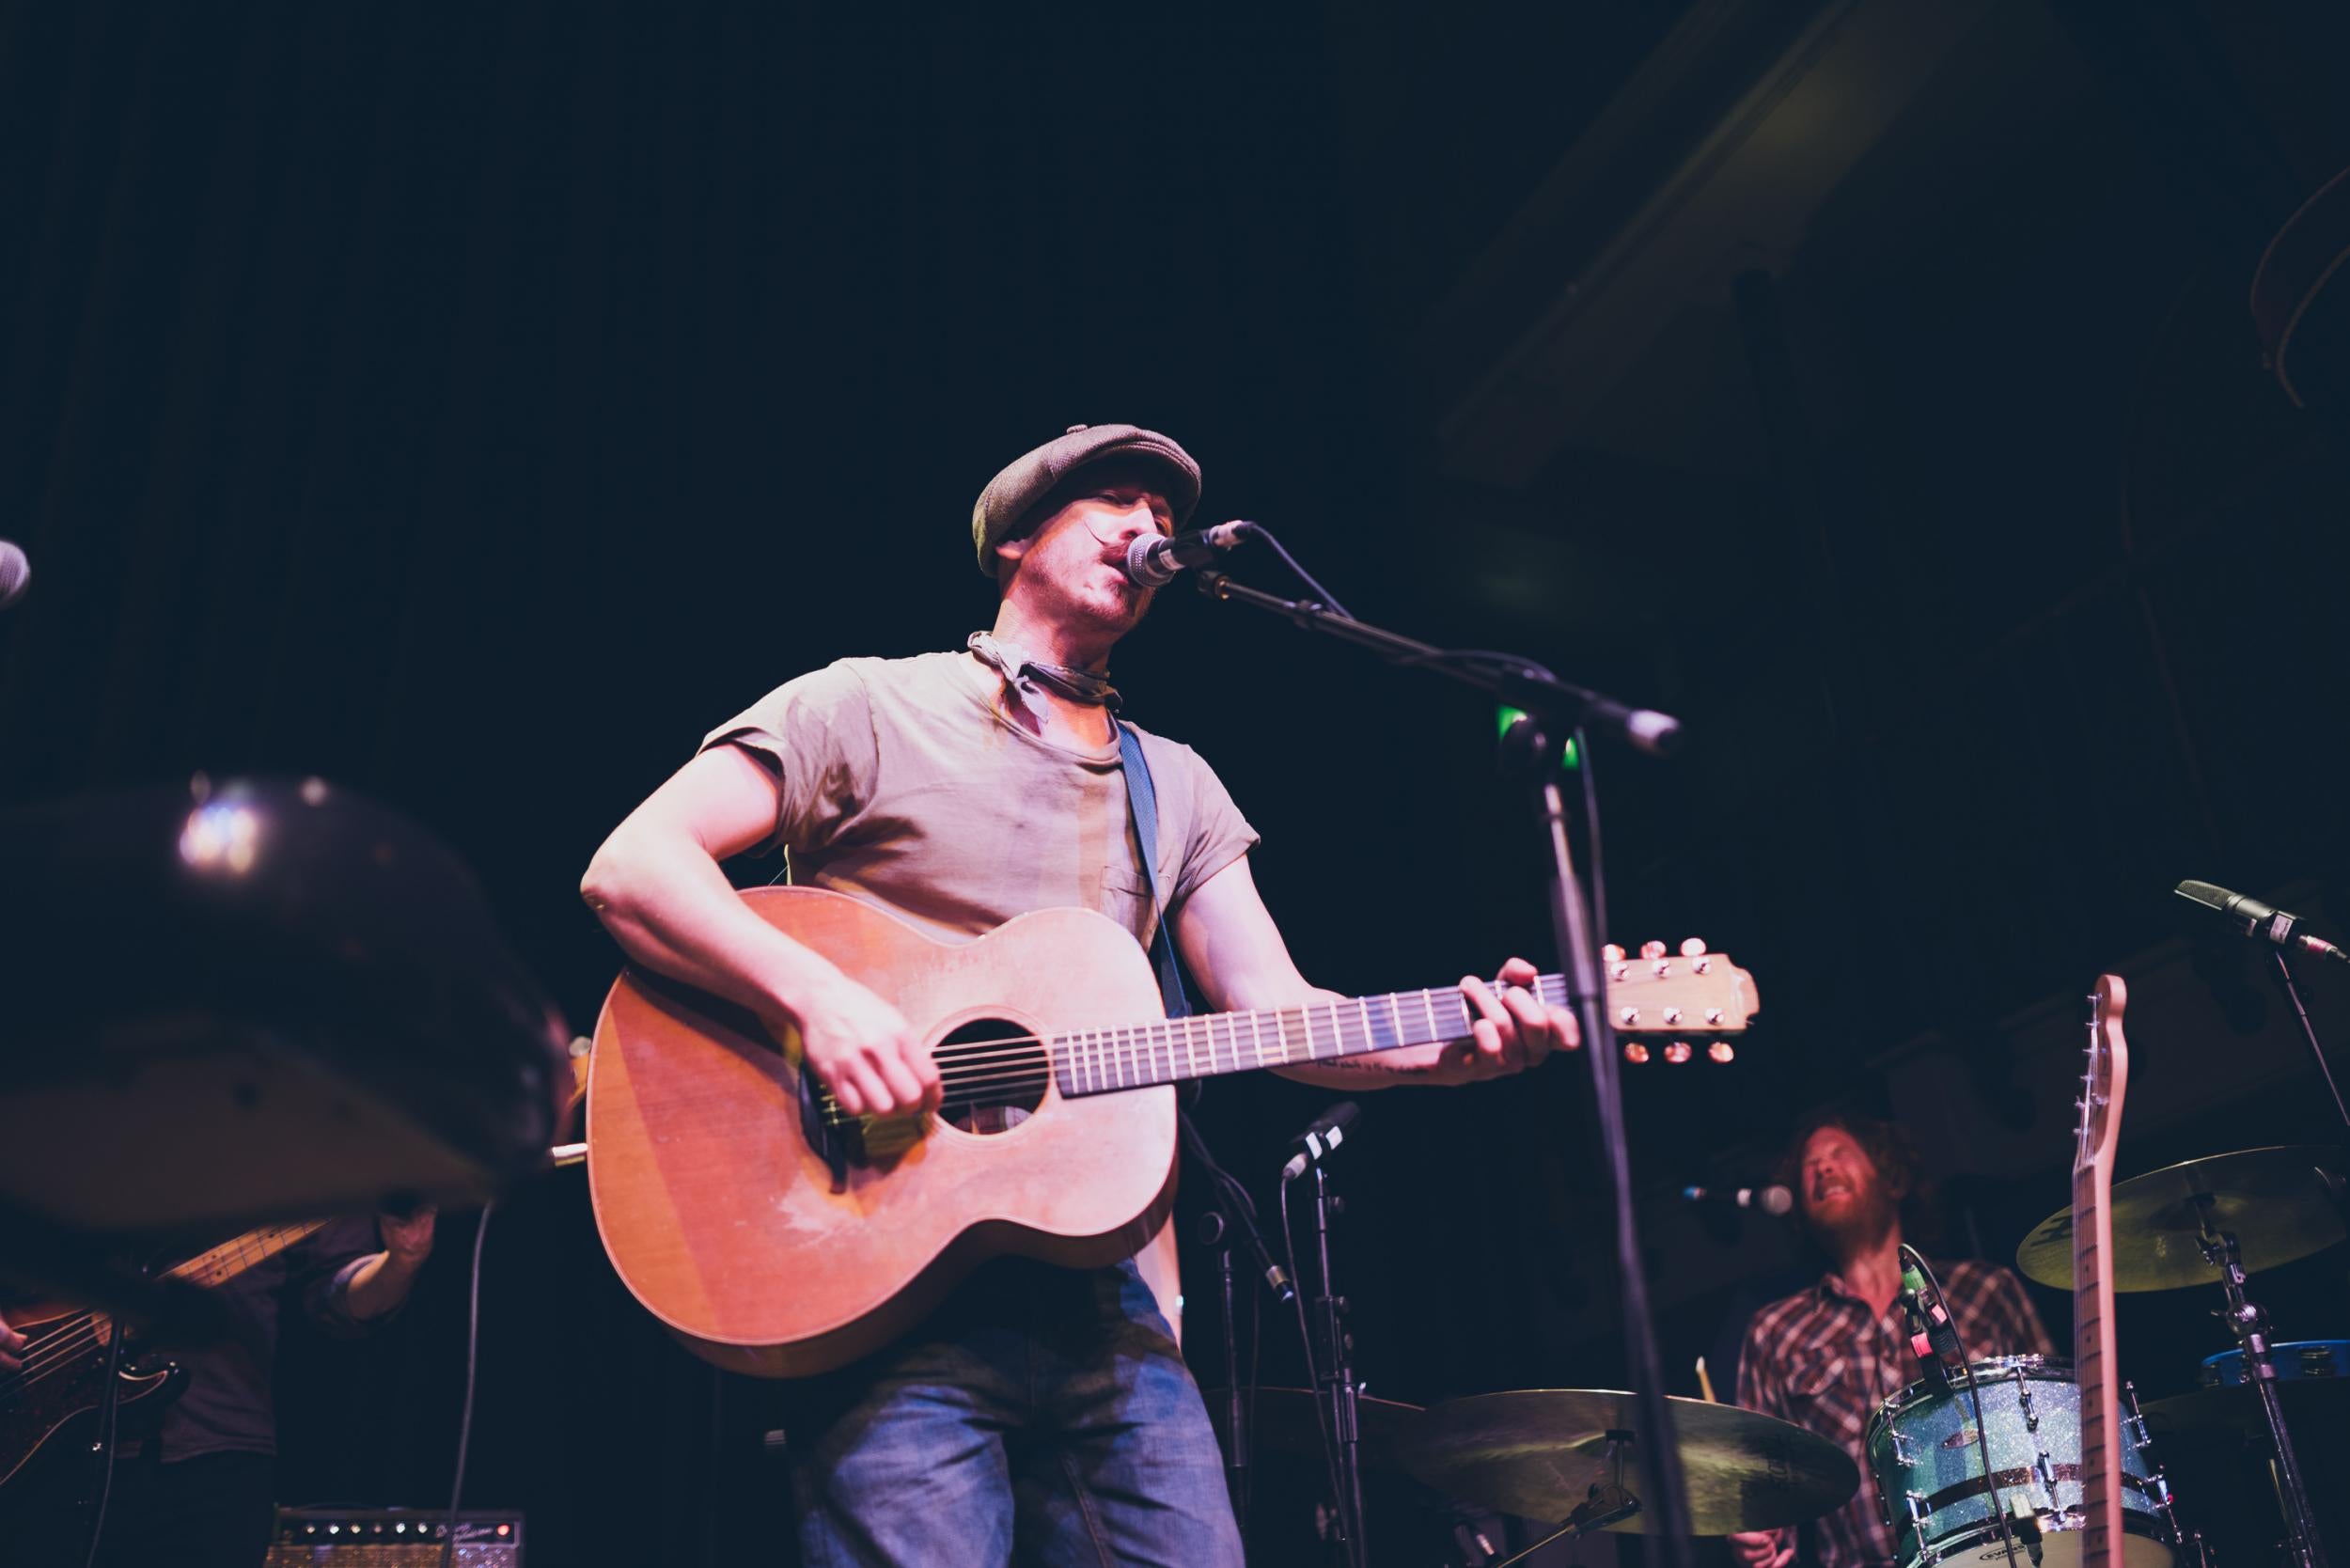 Foy Vance performs at Hoxton Hall in London